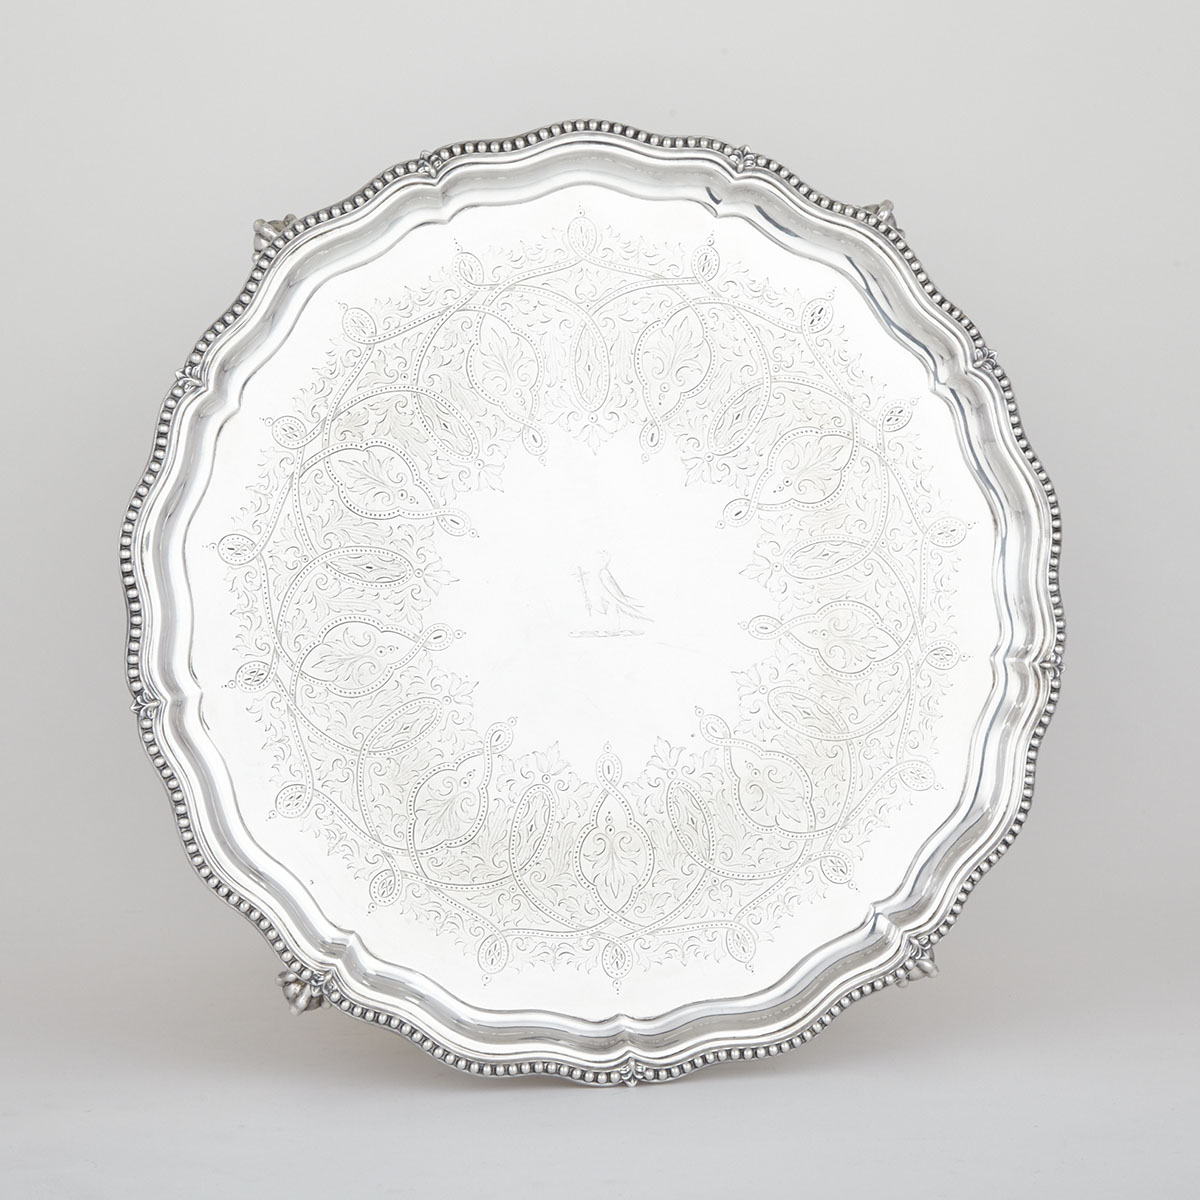 Victorian Silver Plated Circular Salver, Henry Wilkinson & Co., late 19th century